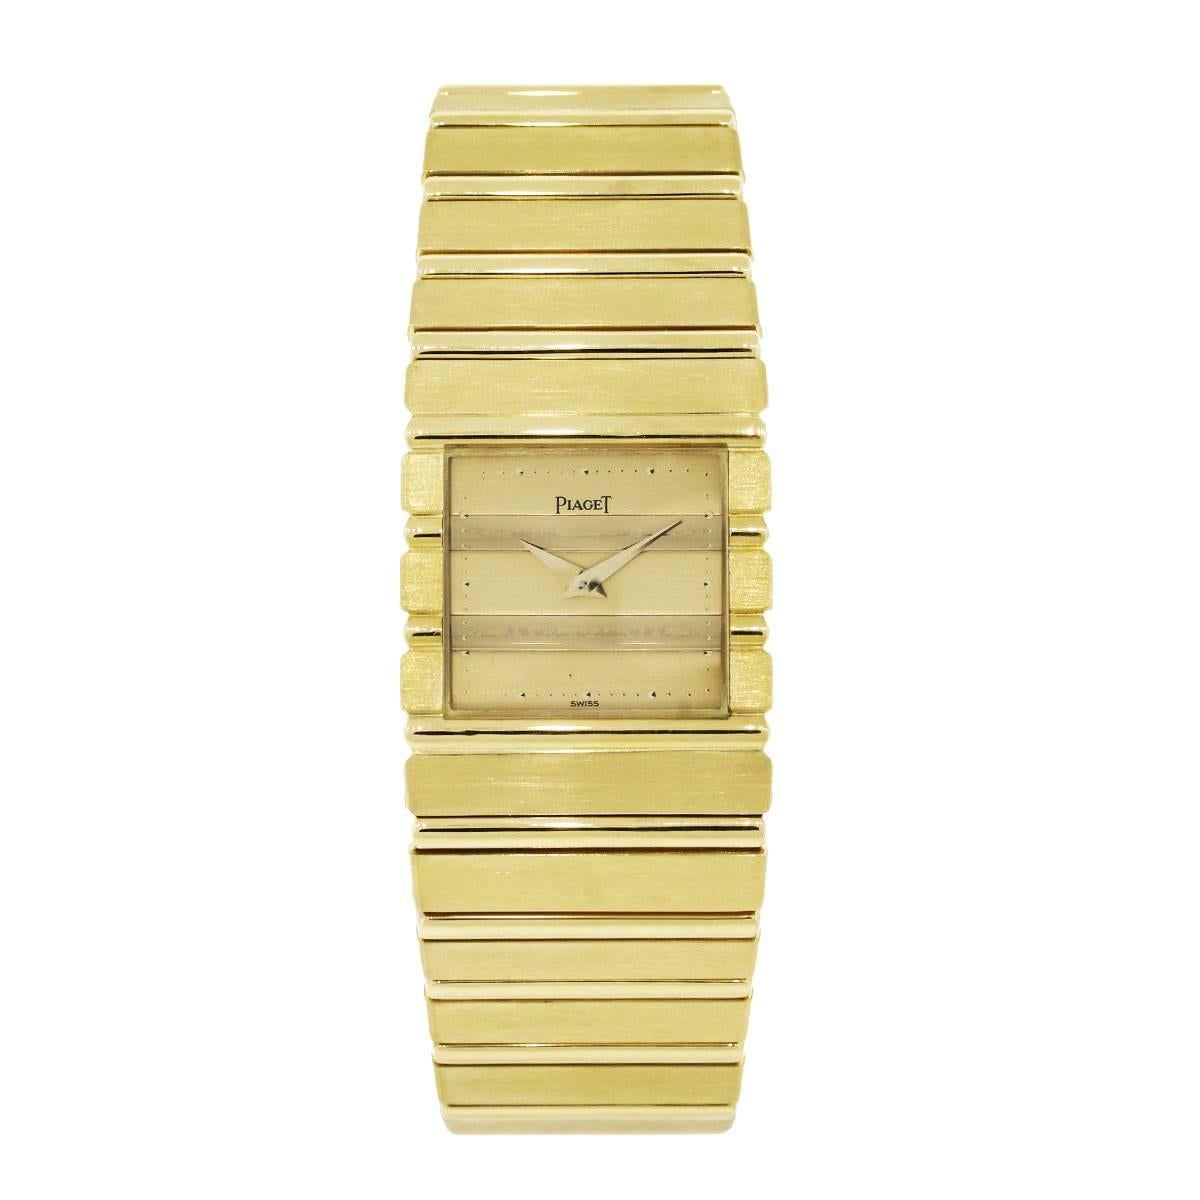 Designer: Piaget
Model: Polo
MPN: 7131
Case Material: 18k yellow gold
Case Diameter: 25mm
Bracelet: 18k yellow gold
Dial: Gold dial
Crystal: Scratch Resistant Sapphire
Clasp: Jewelers’ clasp
Movement: Quartz
Size: Will fit a 7.25″ wrist
Additional